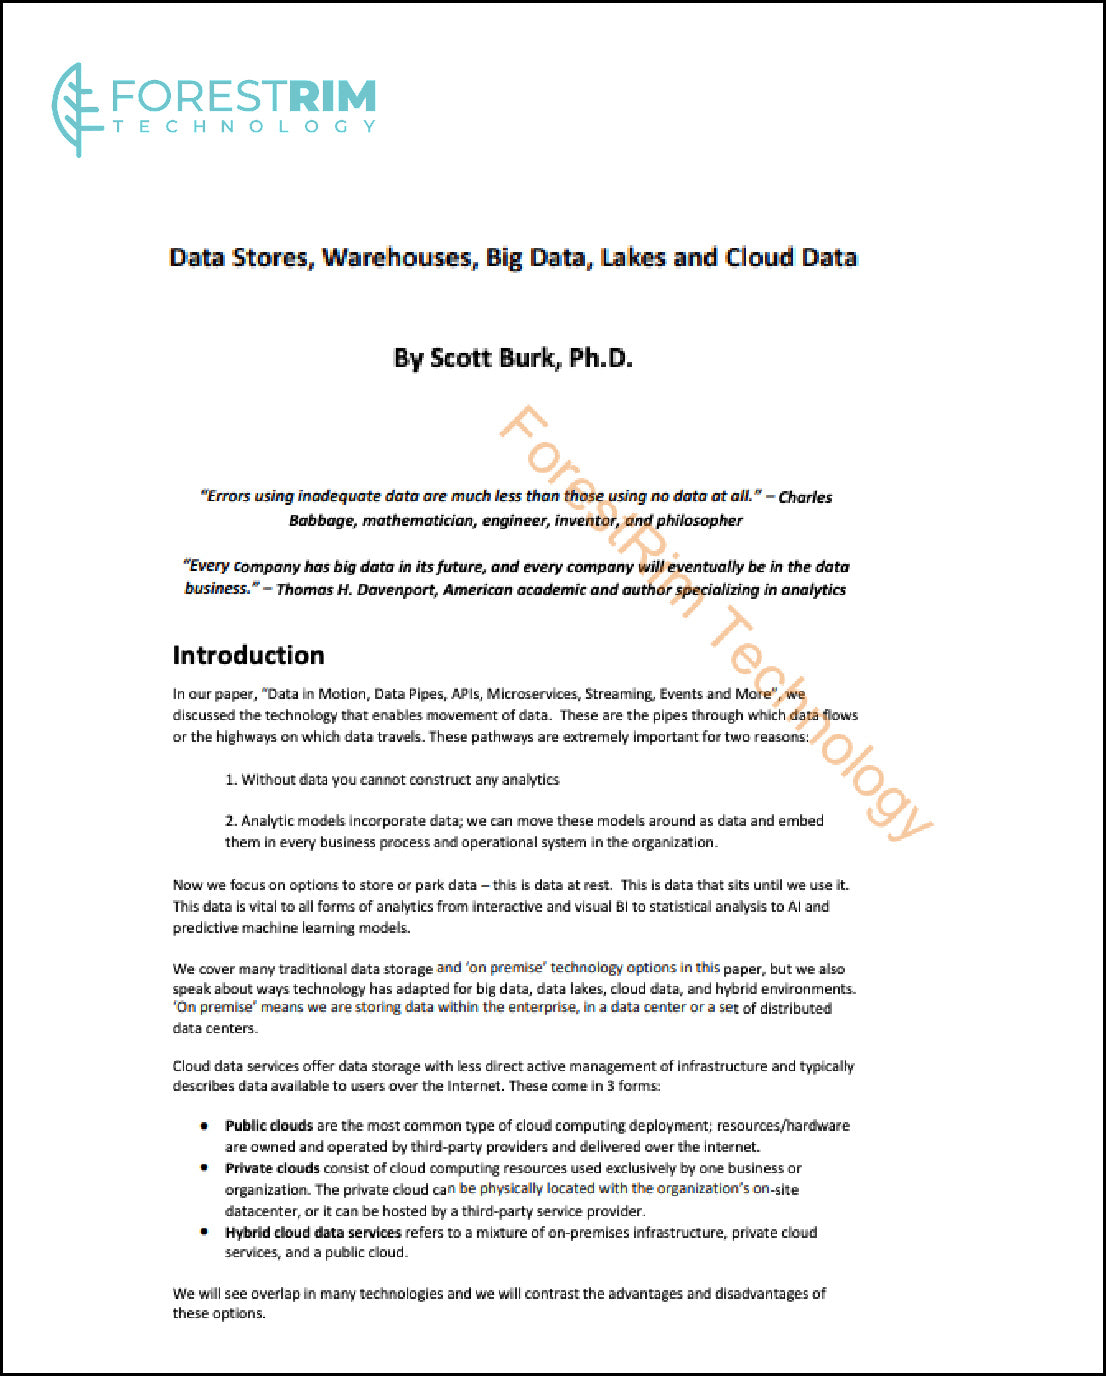 Data Architecture Part 2, Data Stores, Warehouses, Big Data, Lakes and Cloud Data